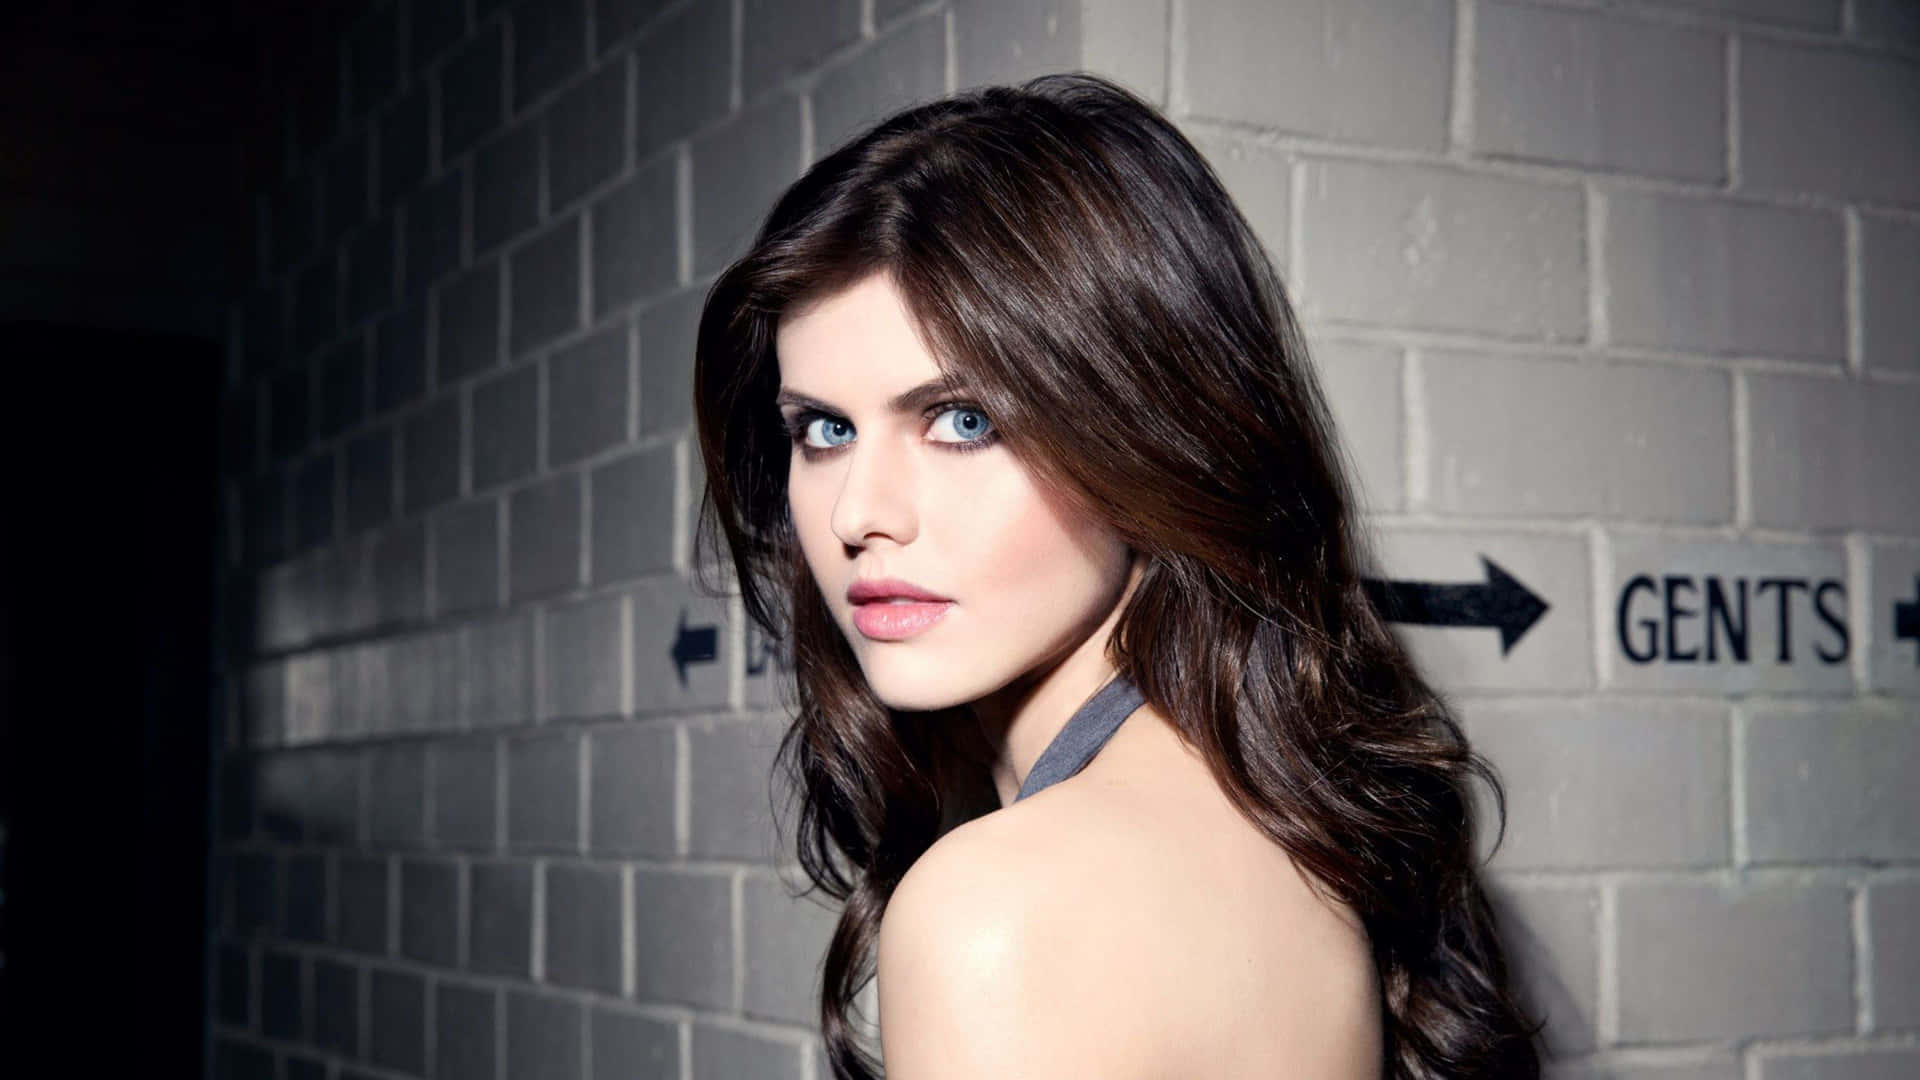 Alexandra Daddario striking a pose in a stunning outfit